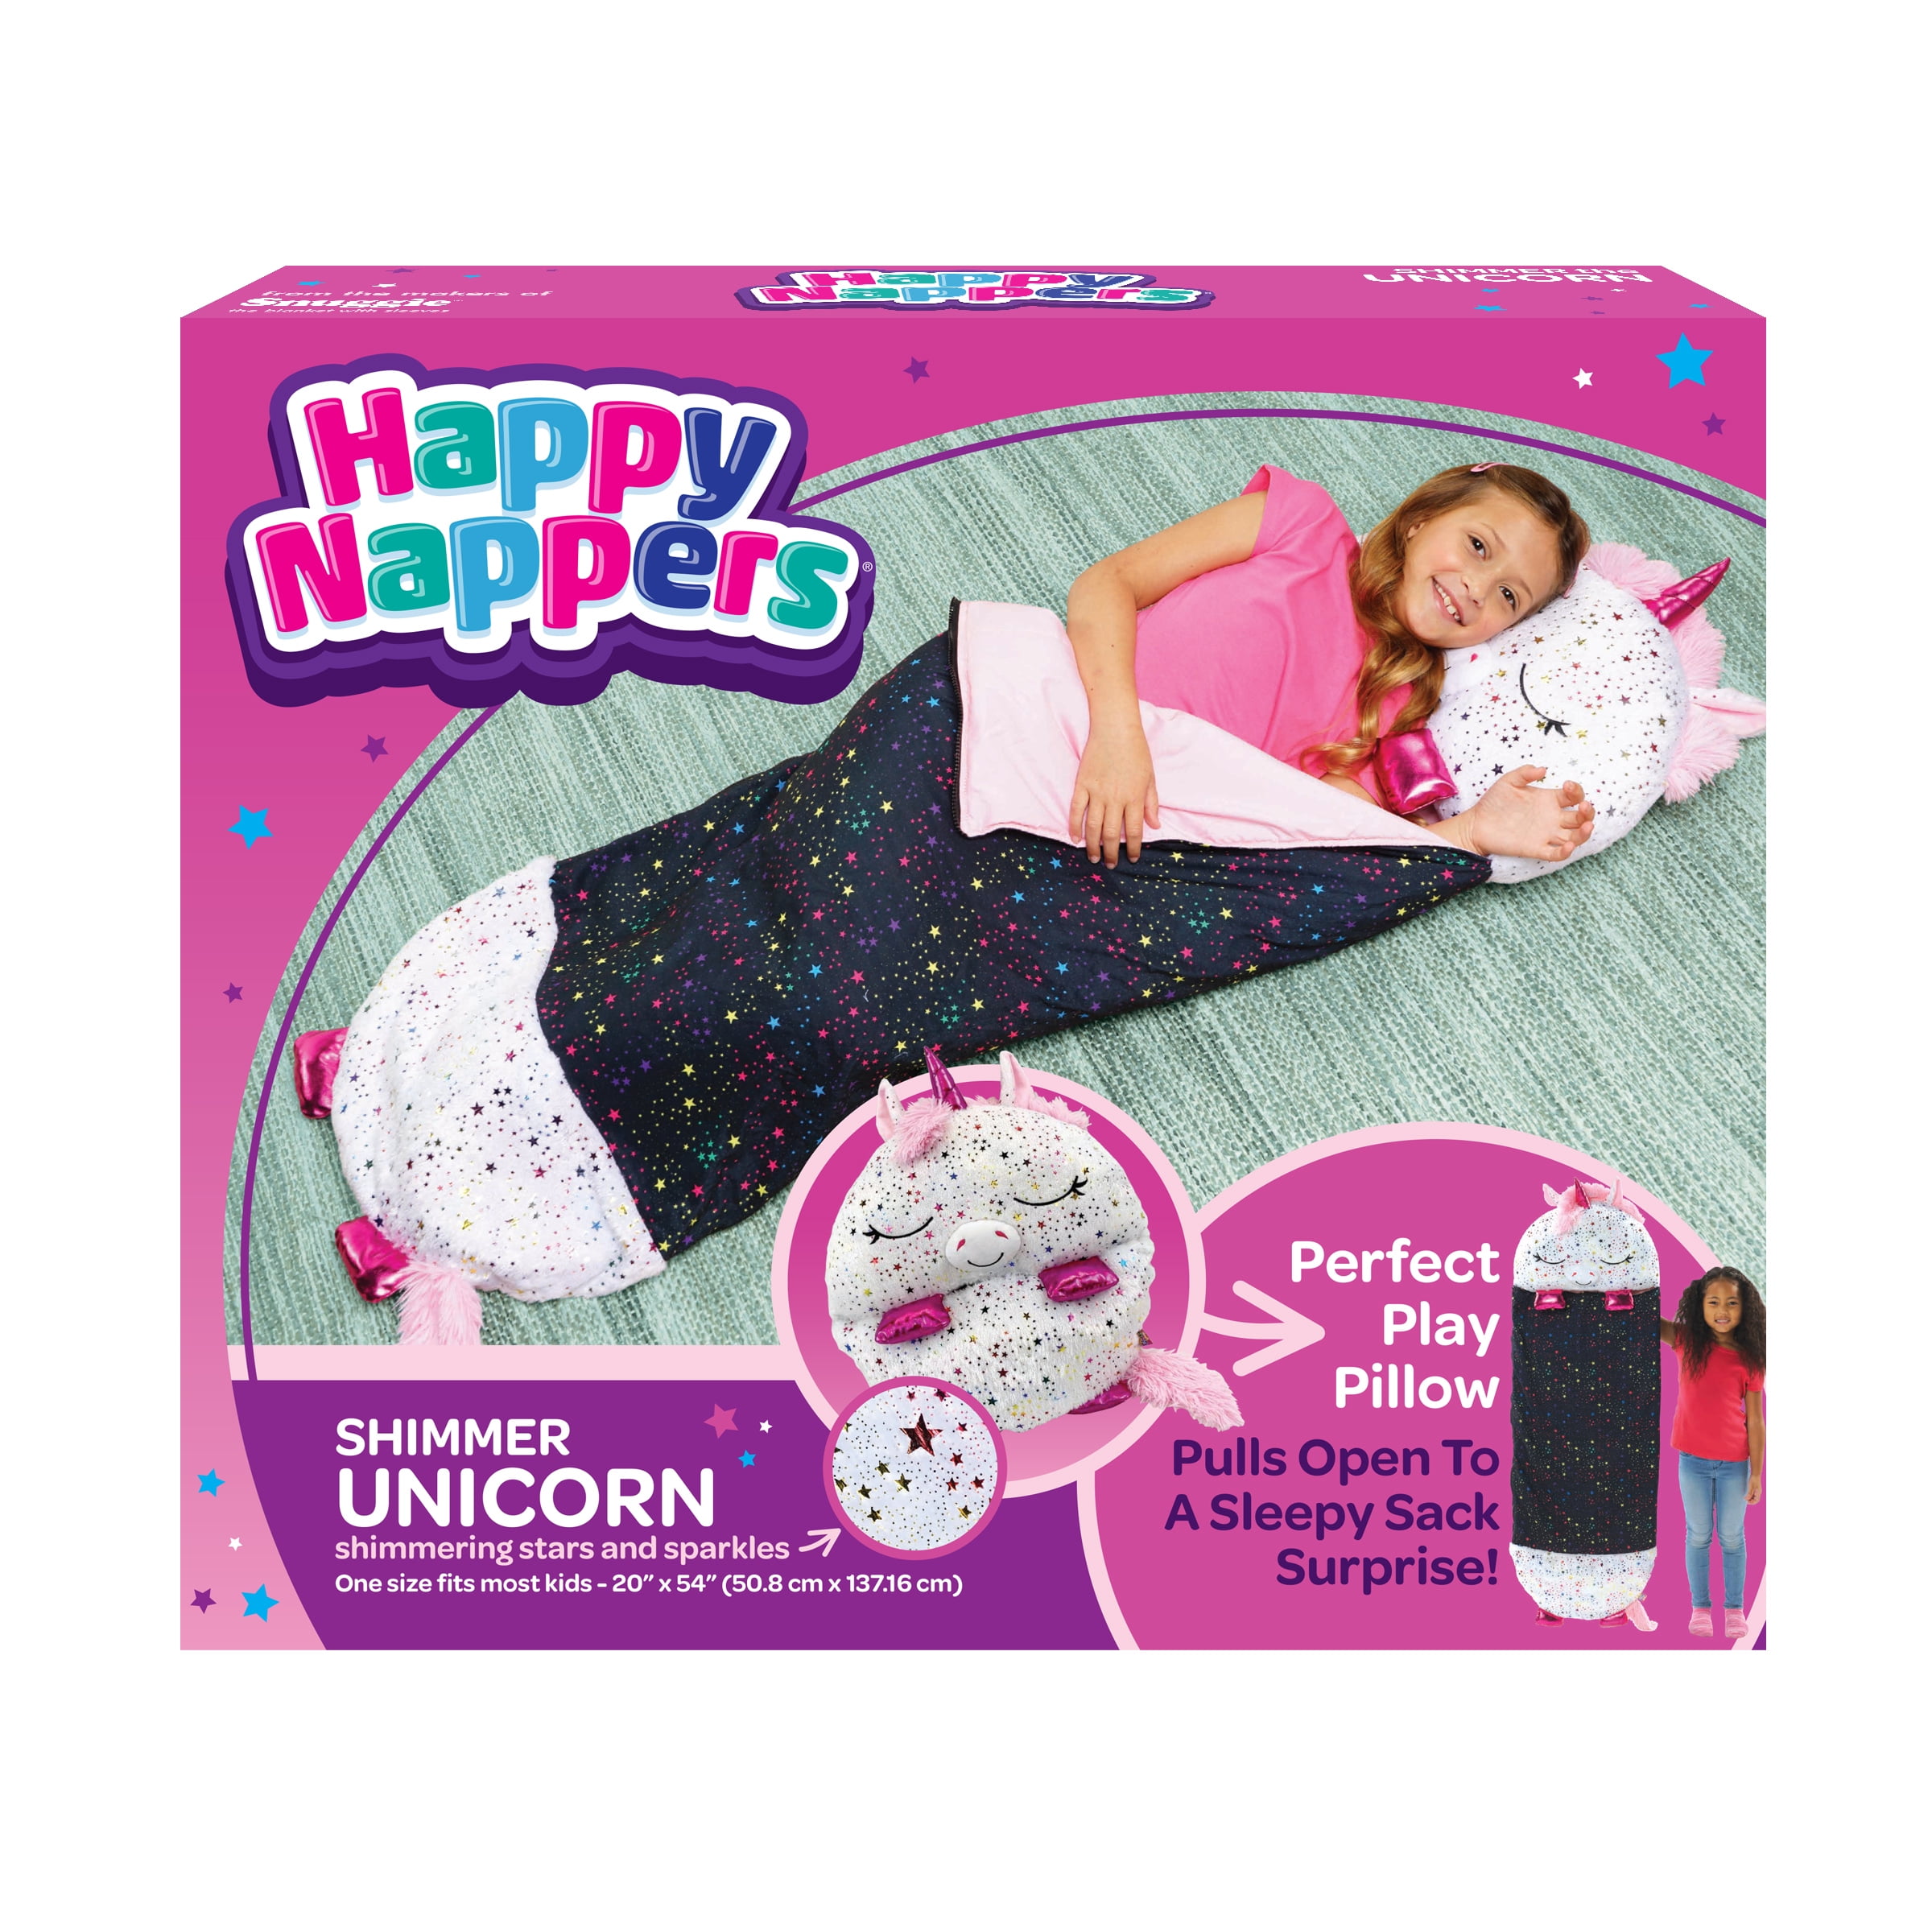 All Season Fun Sleeping Bag Surprise For Kids Super Soft Warm ZHJQTIE Unicorn Pillow & Sleepy Sack Happy Nappers Pillow & Sleepy Sack- Comfy Cozy Compact Color : Green 